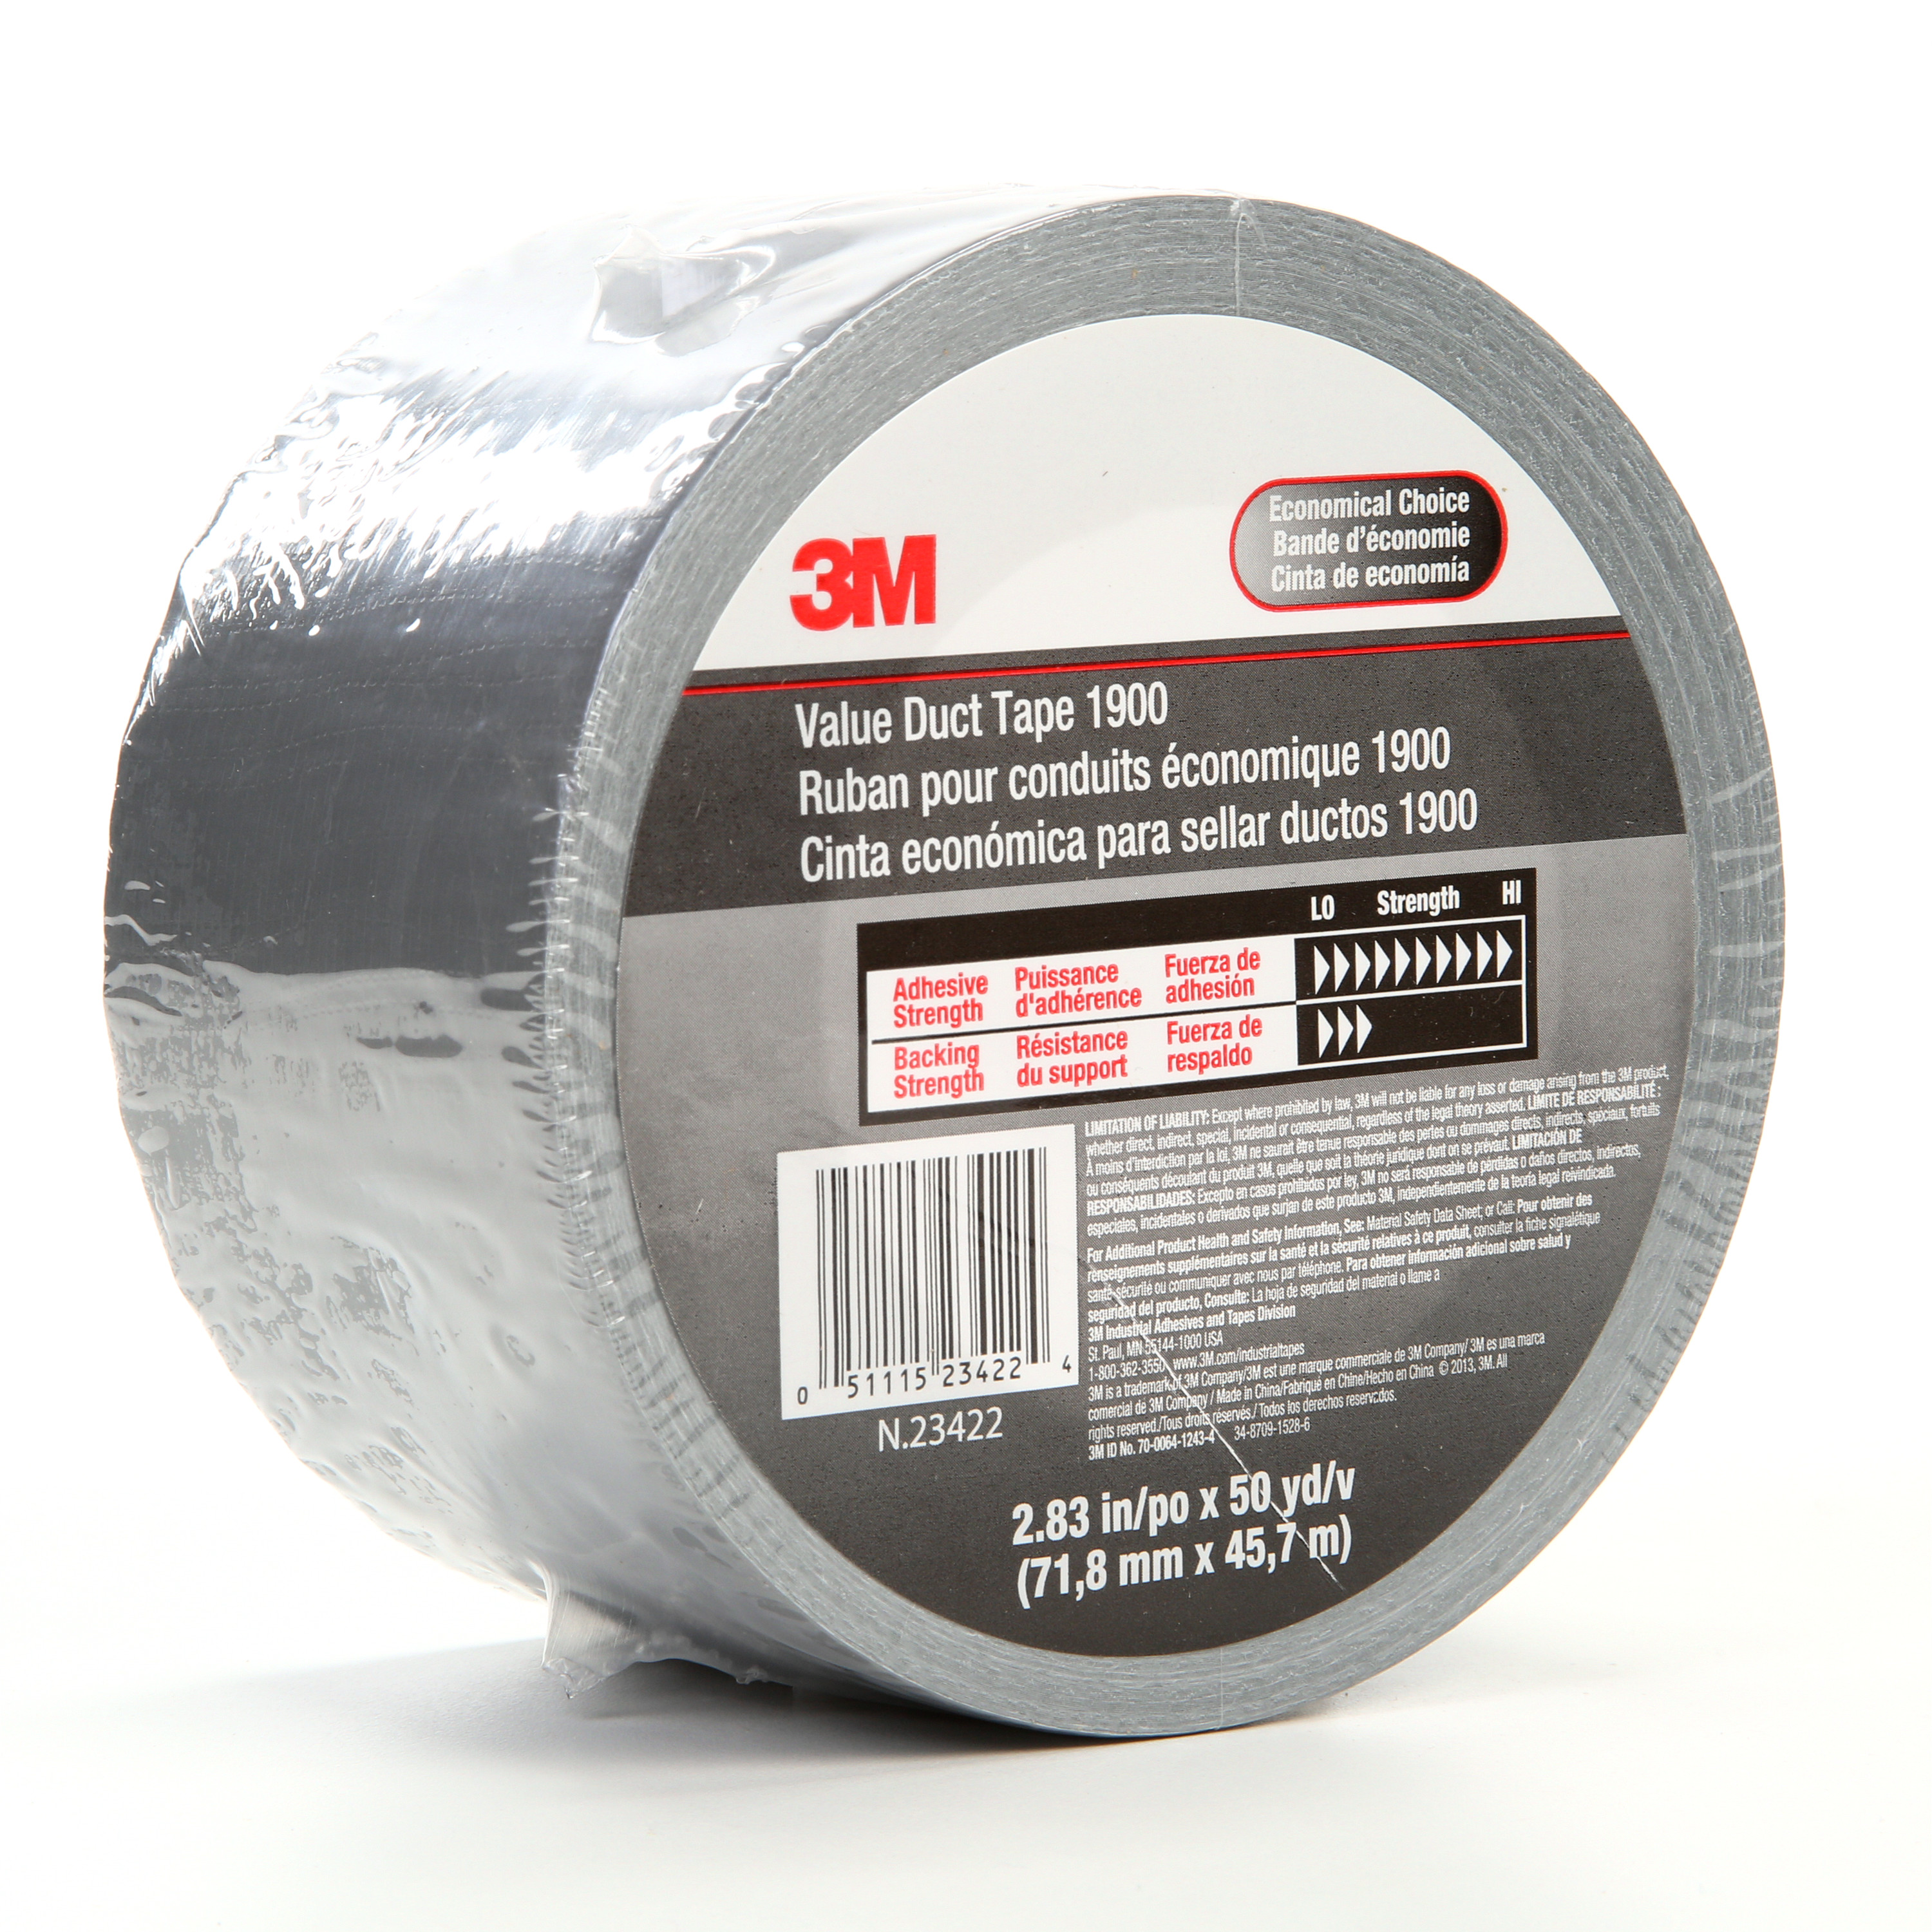 3M™ Value Duct Tape 1900, Silver, 2.83 in x 50 yd, 5.8 mil, 12 per case,
Individually Wrapped Conveniently Packaged